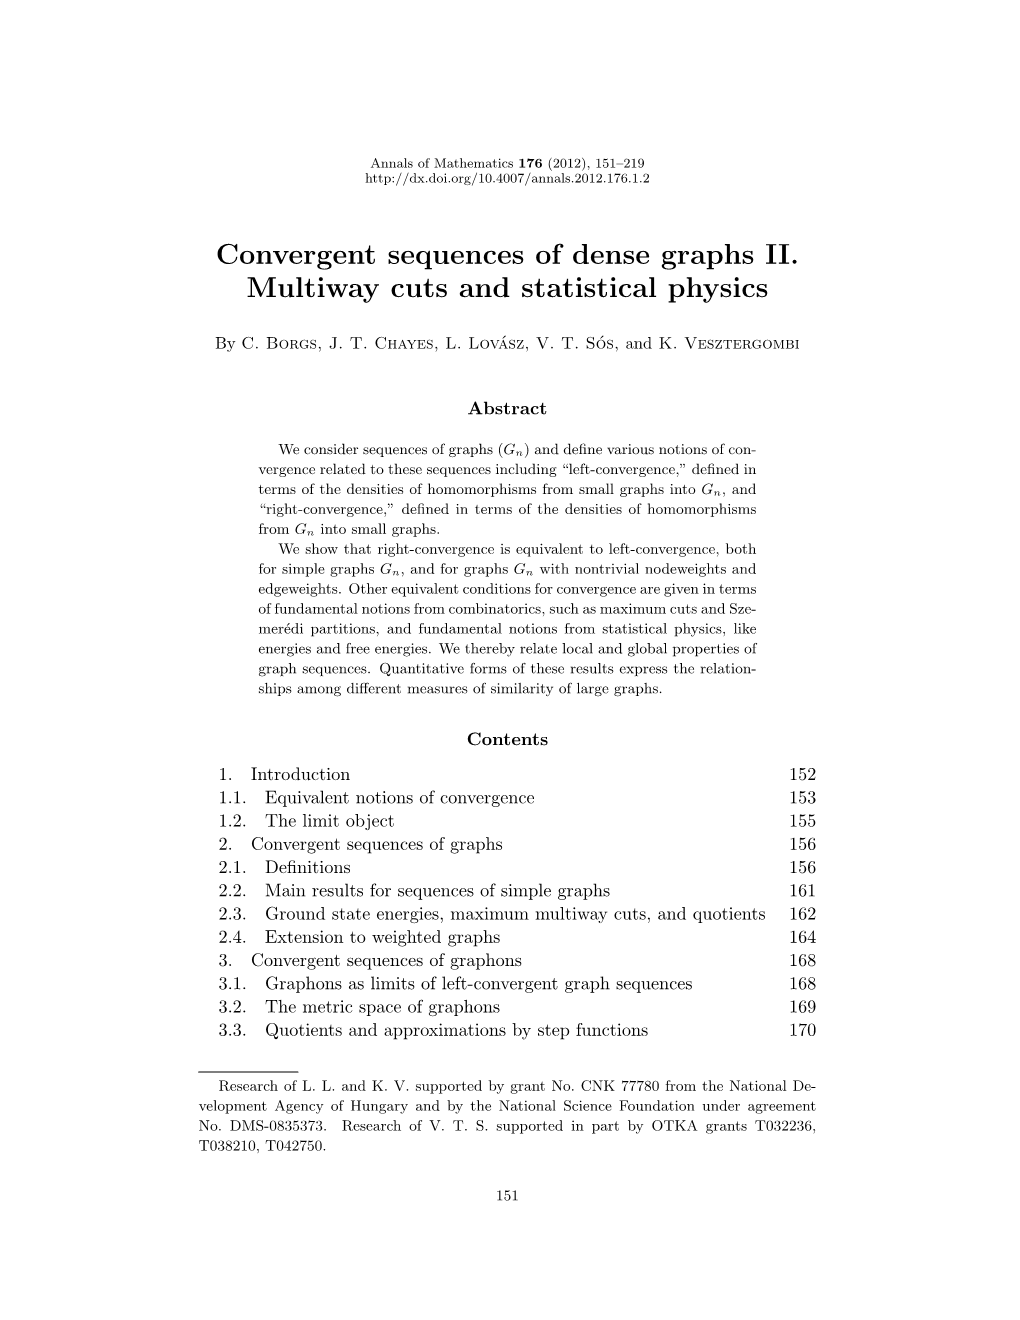 Convergent Sequences of Dense Graphs II. Multiway Cuts and Statistical Physics